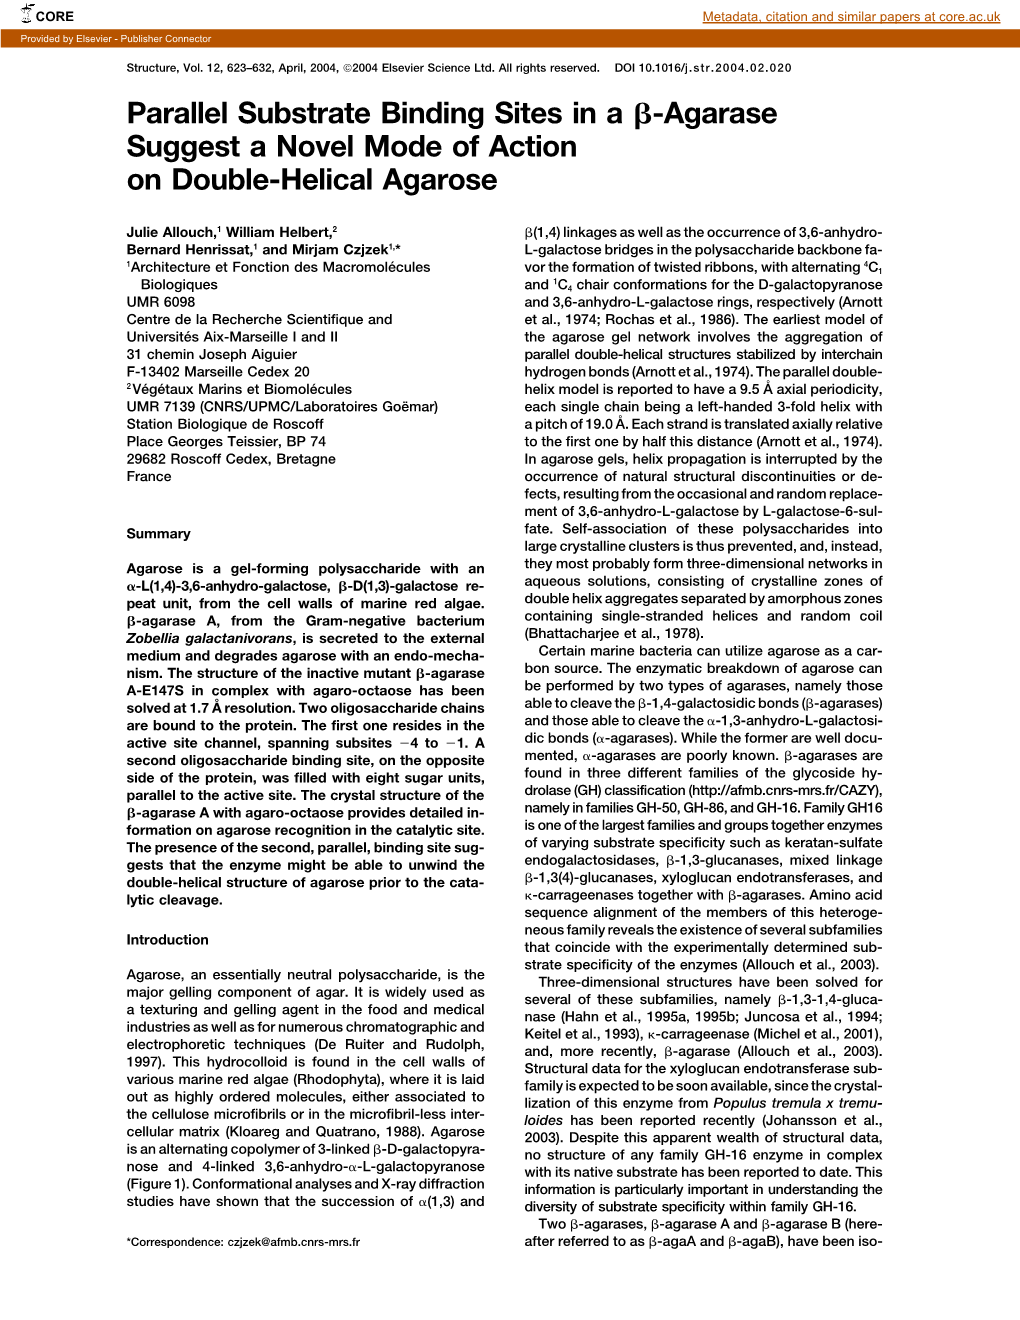 Parallel Substrate Binding Sites in a -Agarase Suggest a Novel Mode of Action on Double-Helical Agarose